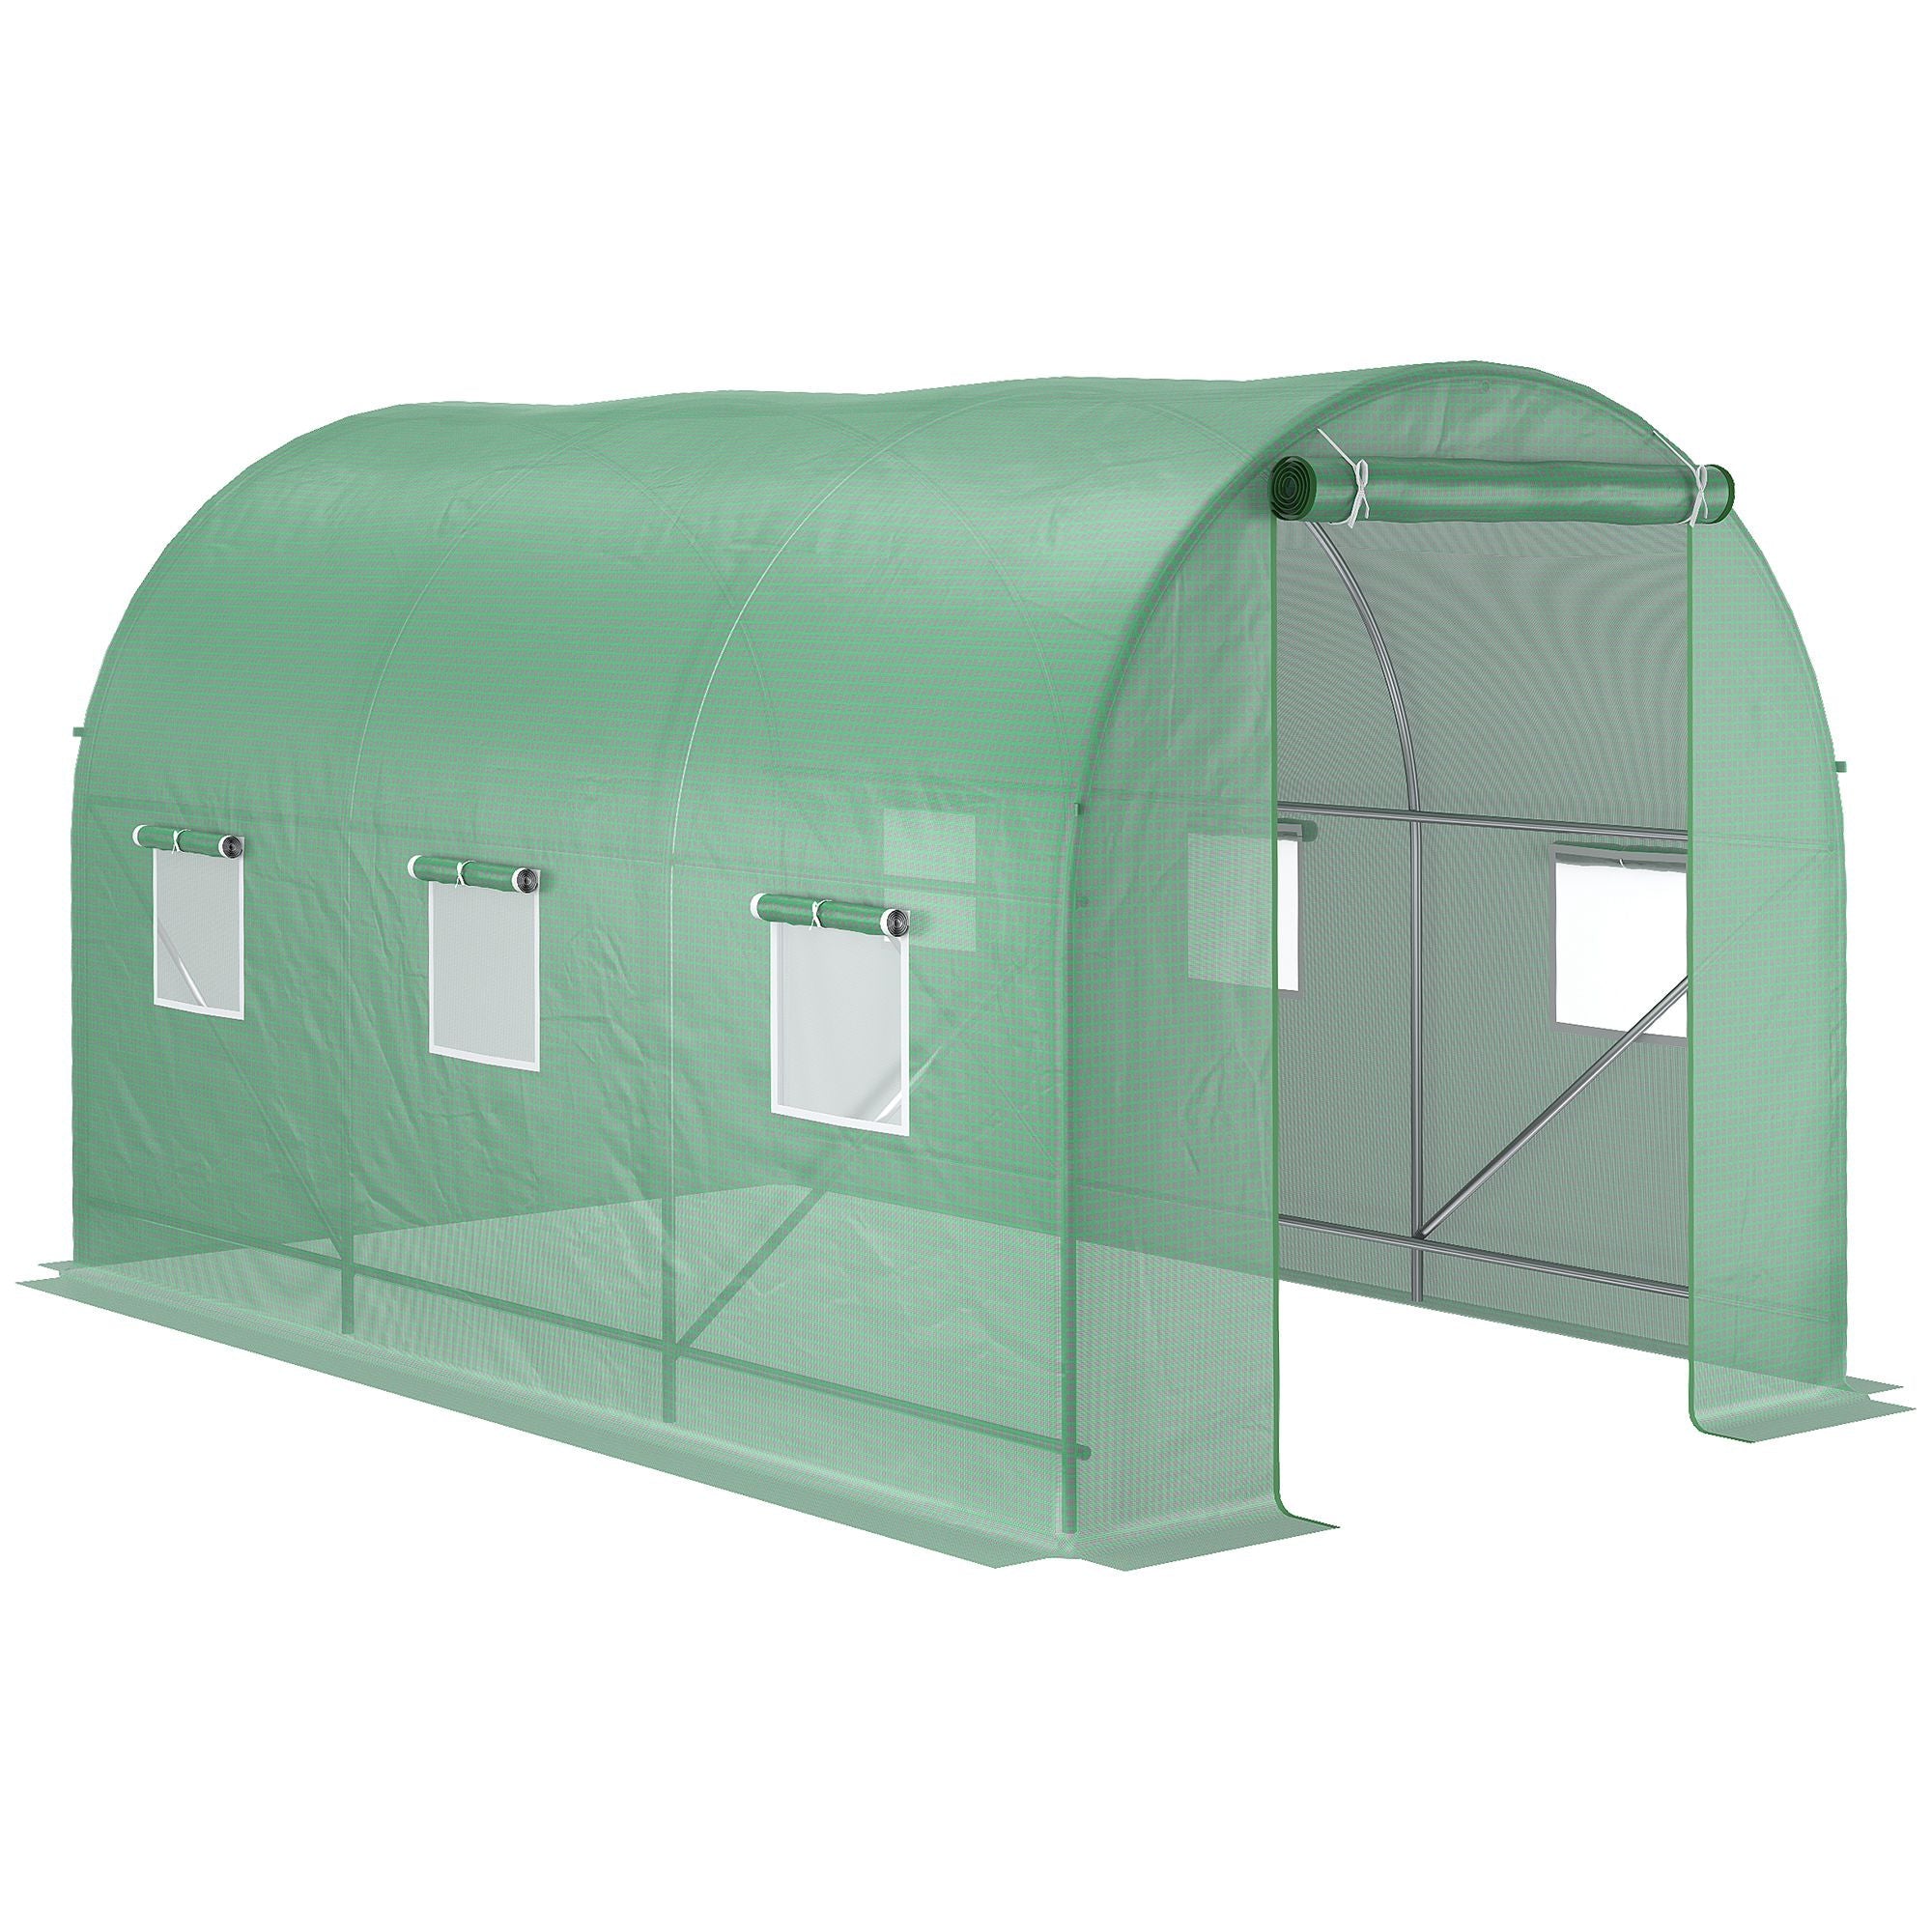 Outsunny 3.5 x 2 x 2 m Polytunnel Greenhouse, Walk in Pollytunnel Tent with Steel Frame, PE Cover, Roll Up Door and 6 Windows, Green - TovaHaus